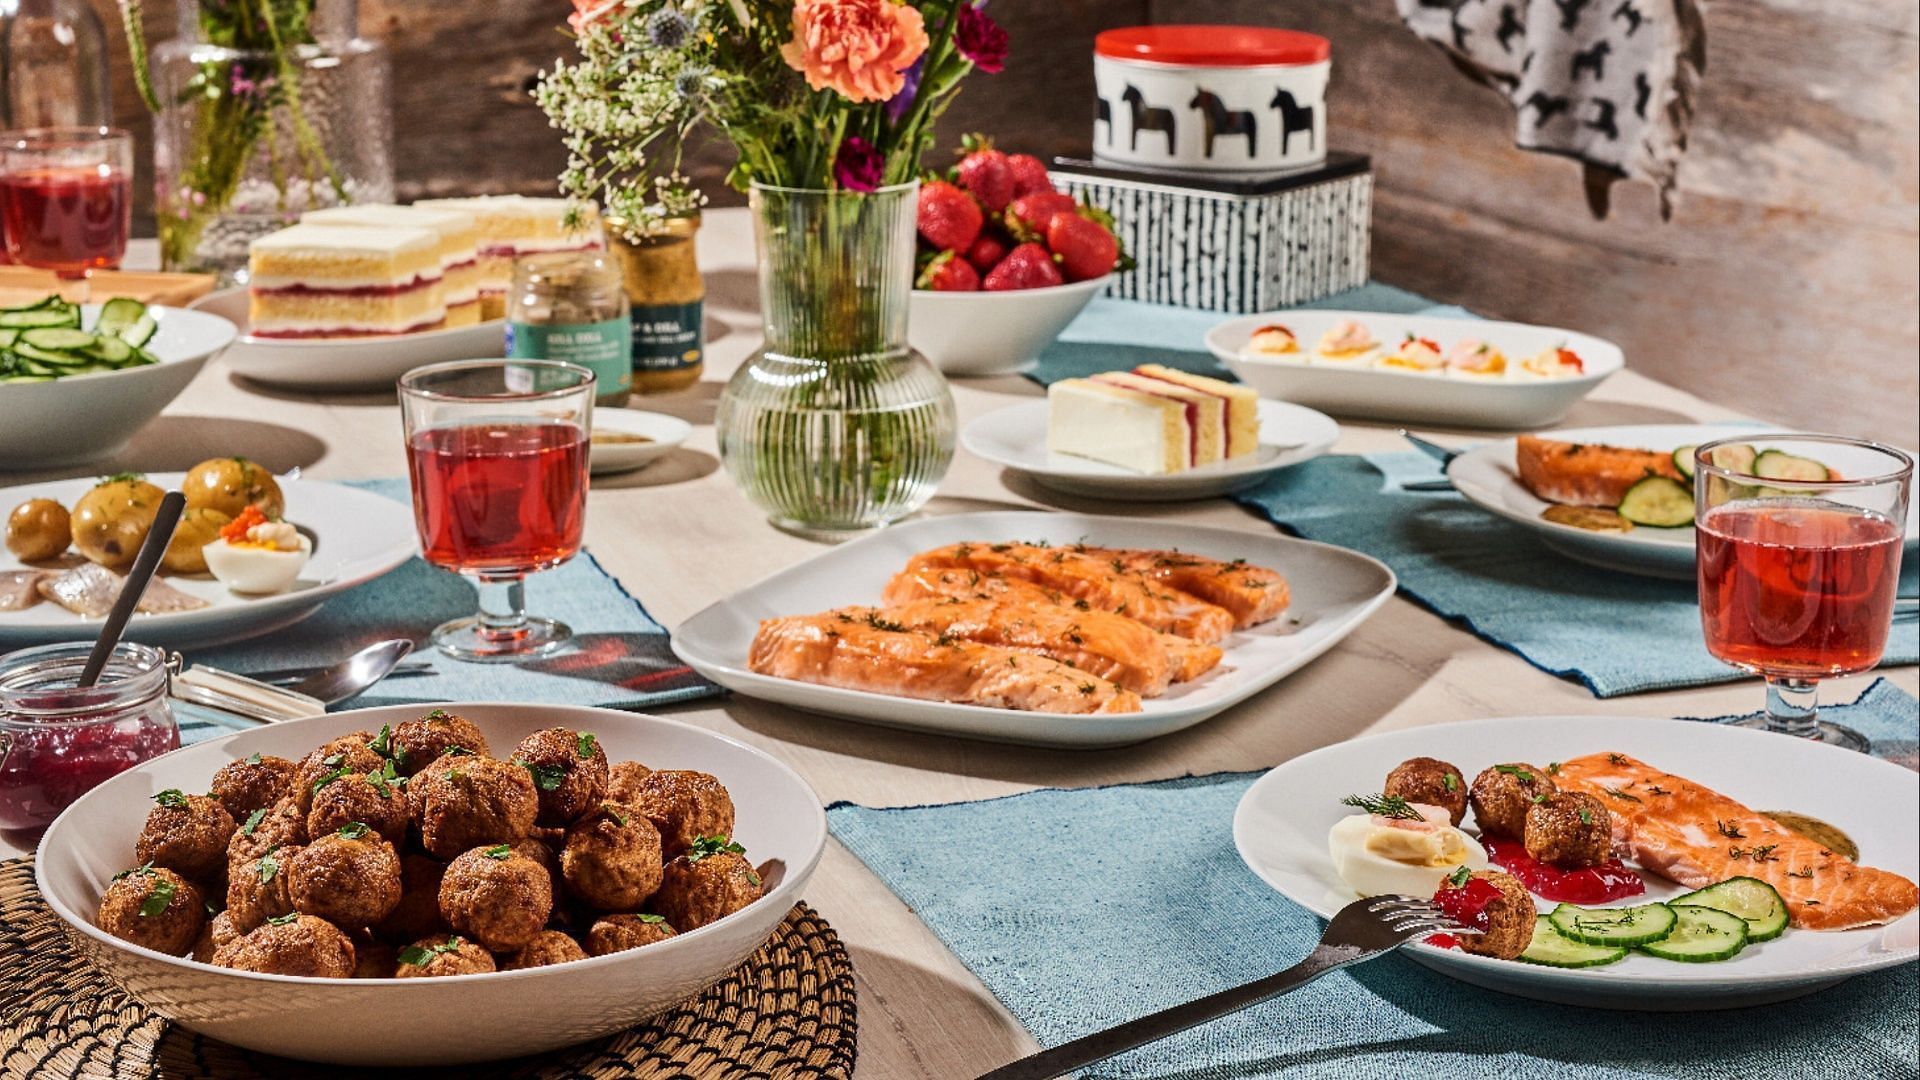 Annual Midsummer Buffet returns to IKEA, to be held on June 23 (Image via IKEA)